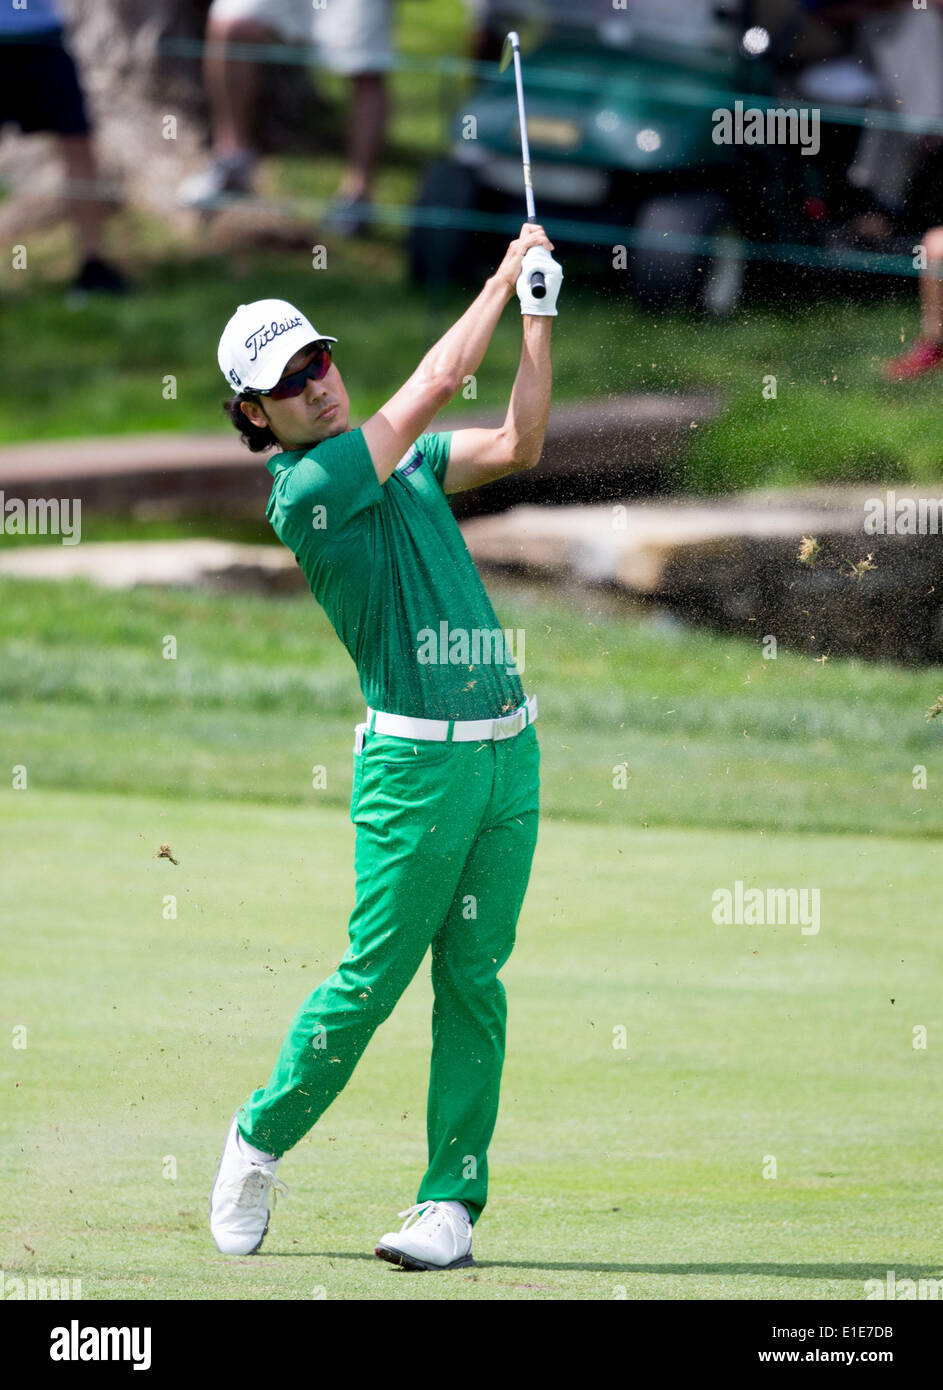 (140602) -- Dublin, June 2, 2014 (Xinhua) -- Kevin Na of the United States drives the ball on the fairway during the Final Round of the Memorial Tournament at Muirfield Village Golf Club in Dublin, the United States, on June 1, 2014. Hideki Matsuyama of Japan won in play off over Kevin Na and claimed the champion. (Xinhua/Shen Ting) Stock Photo